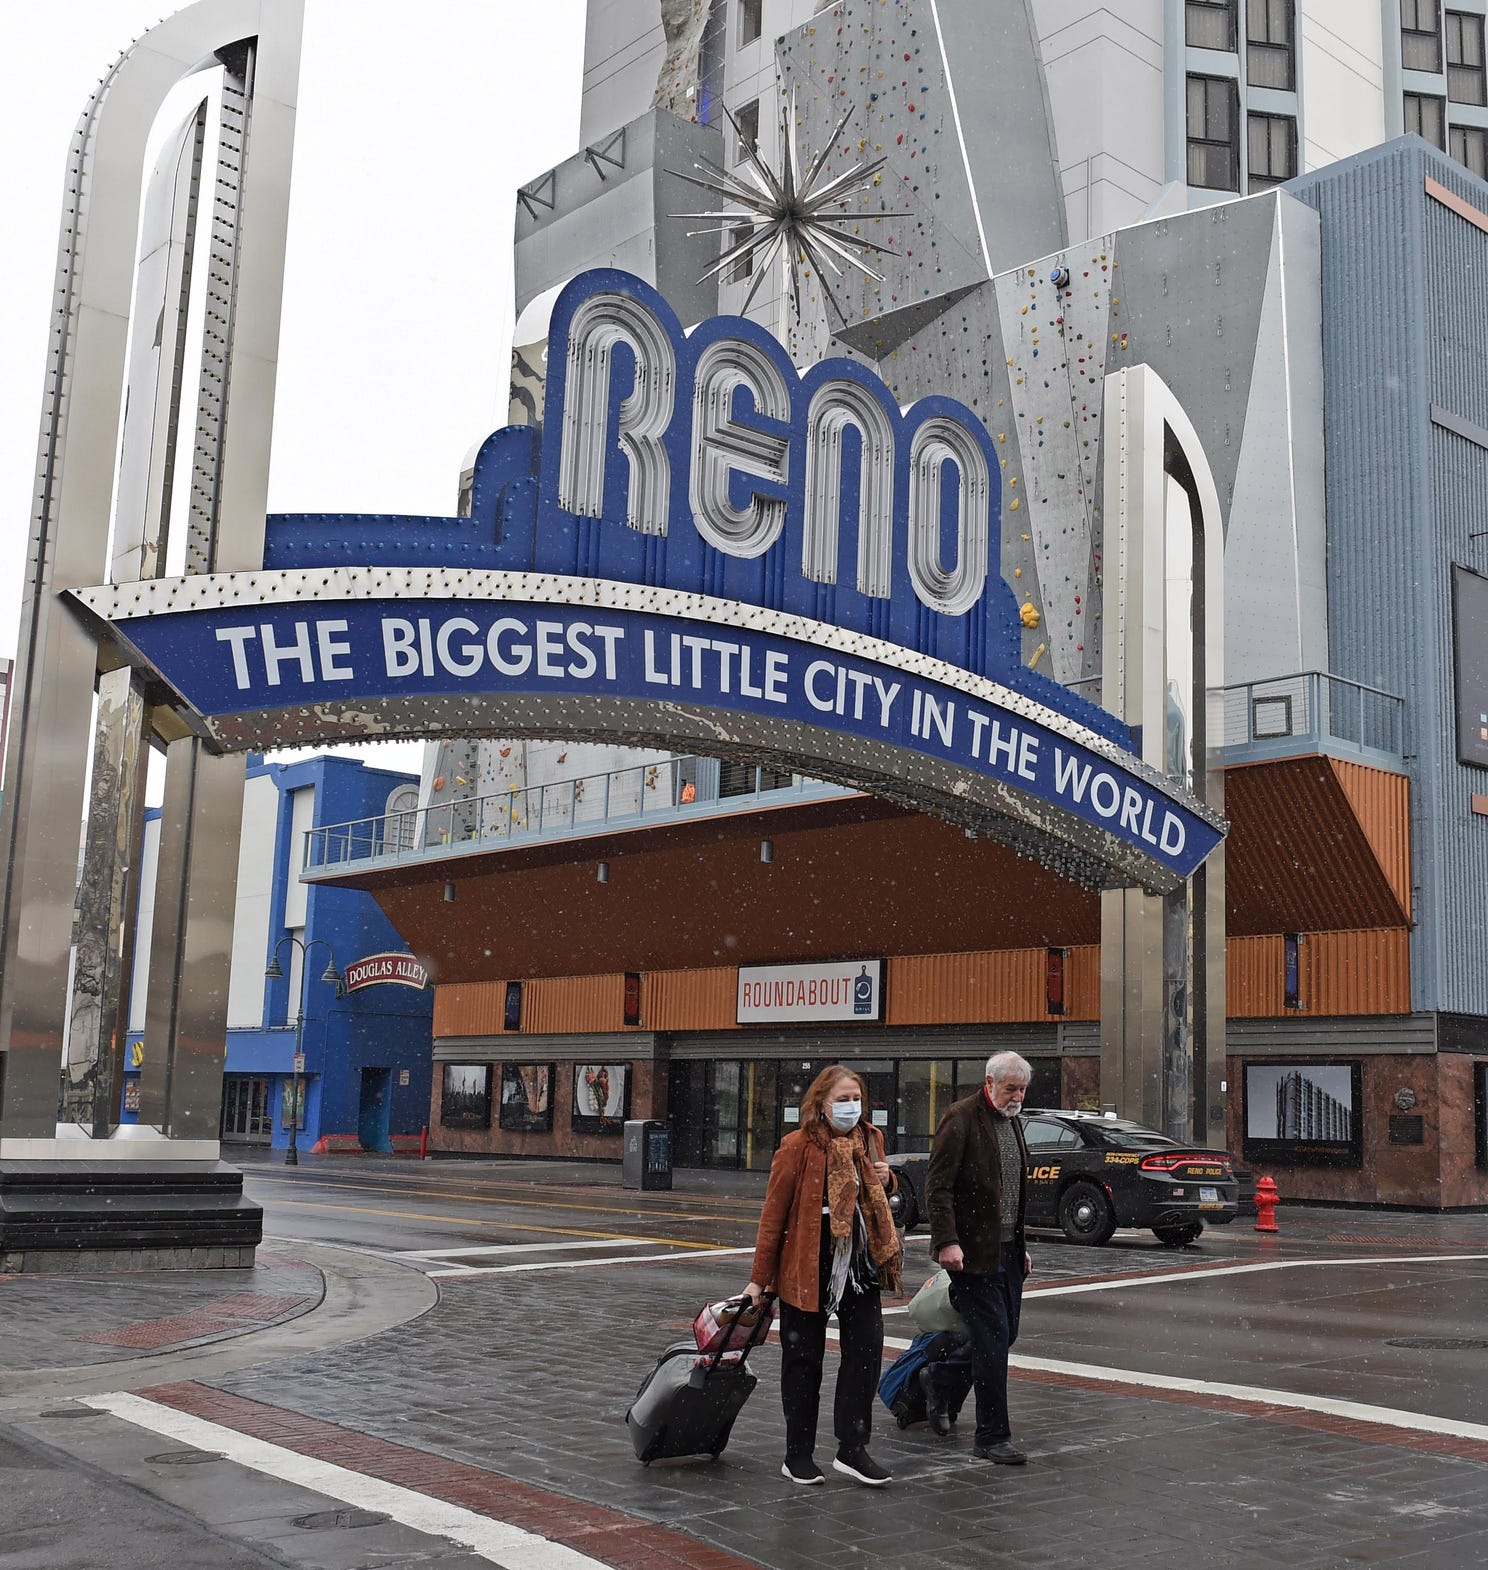 Ted and Chris Champman cross the street in downtown Reno on March 18, 2020. The couple, who is from Florida, was planning on staying in Reno two days, but they had to leave after their first night.